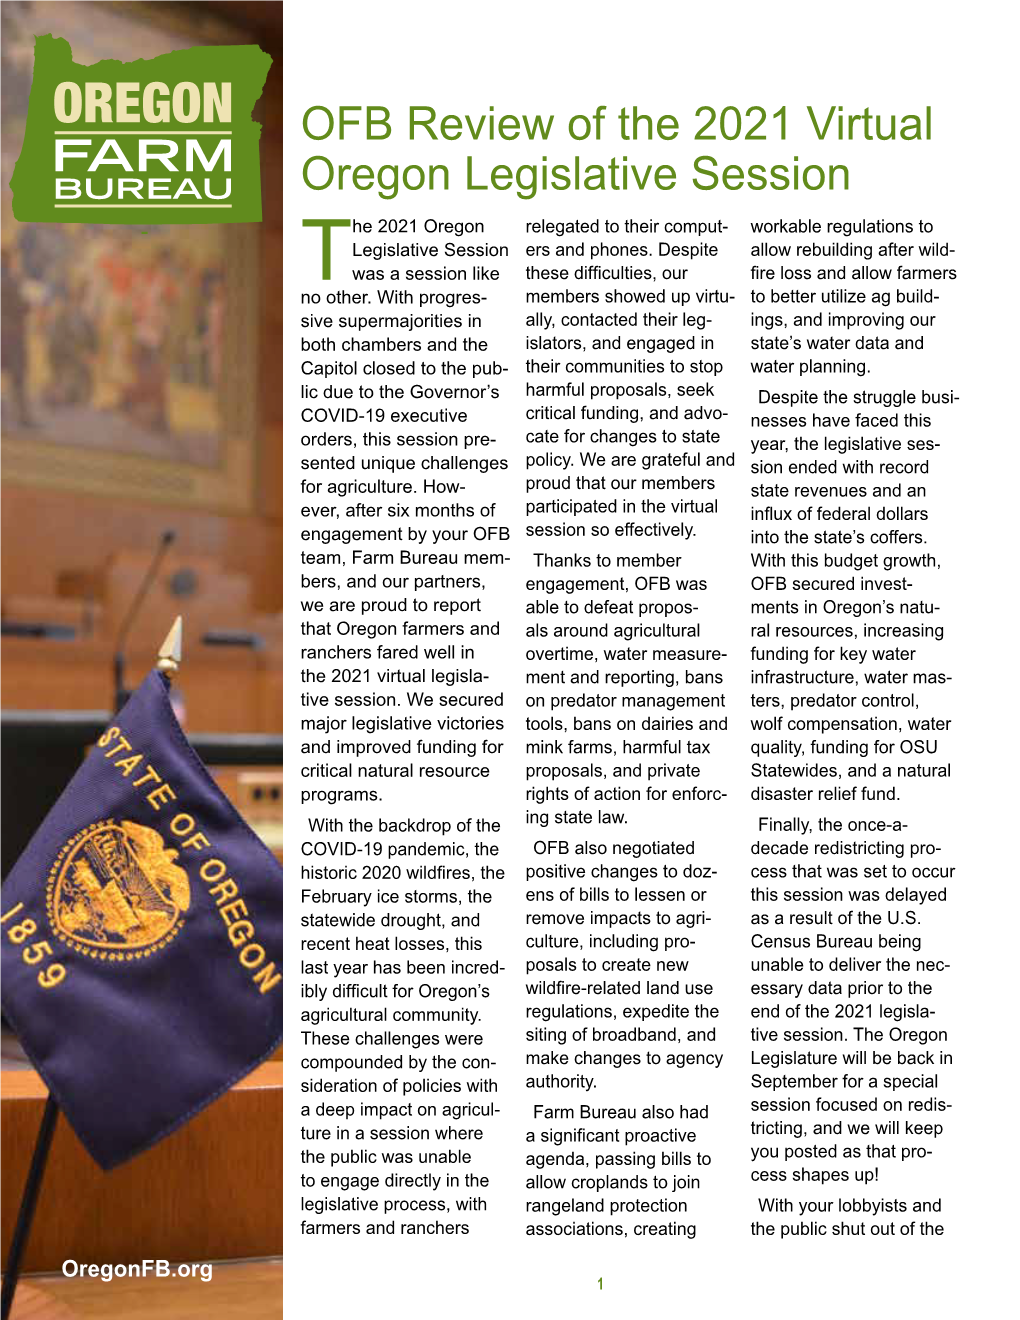 See the OFB Review of the 2021 Virtual Oregon Legislative Session